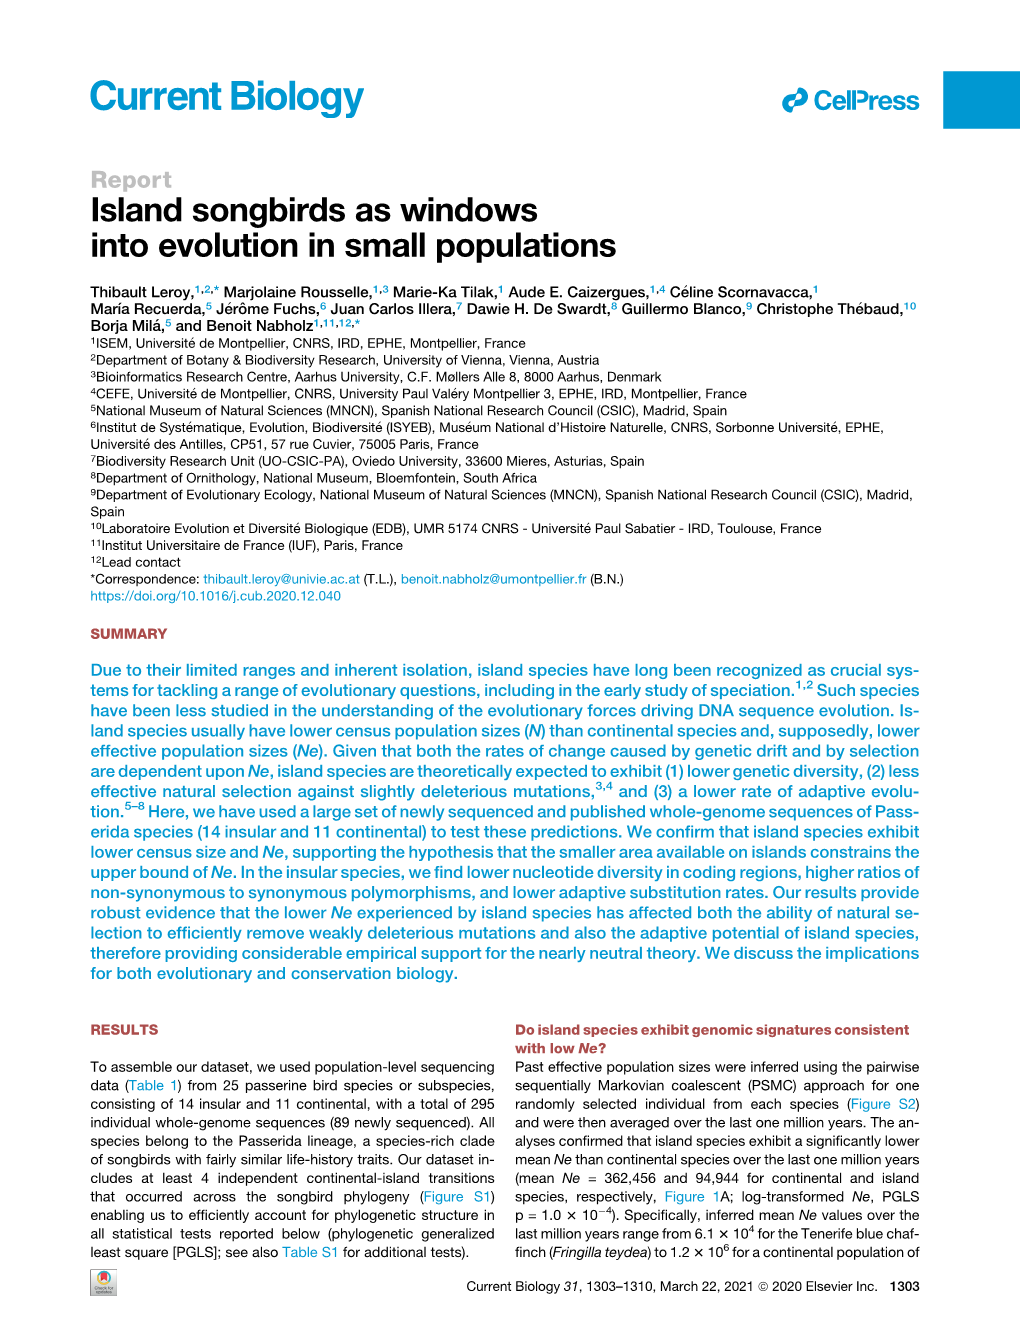 Island Songbirds As Windows Into Evolution in Small Populations